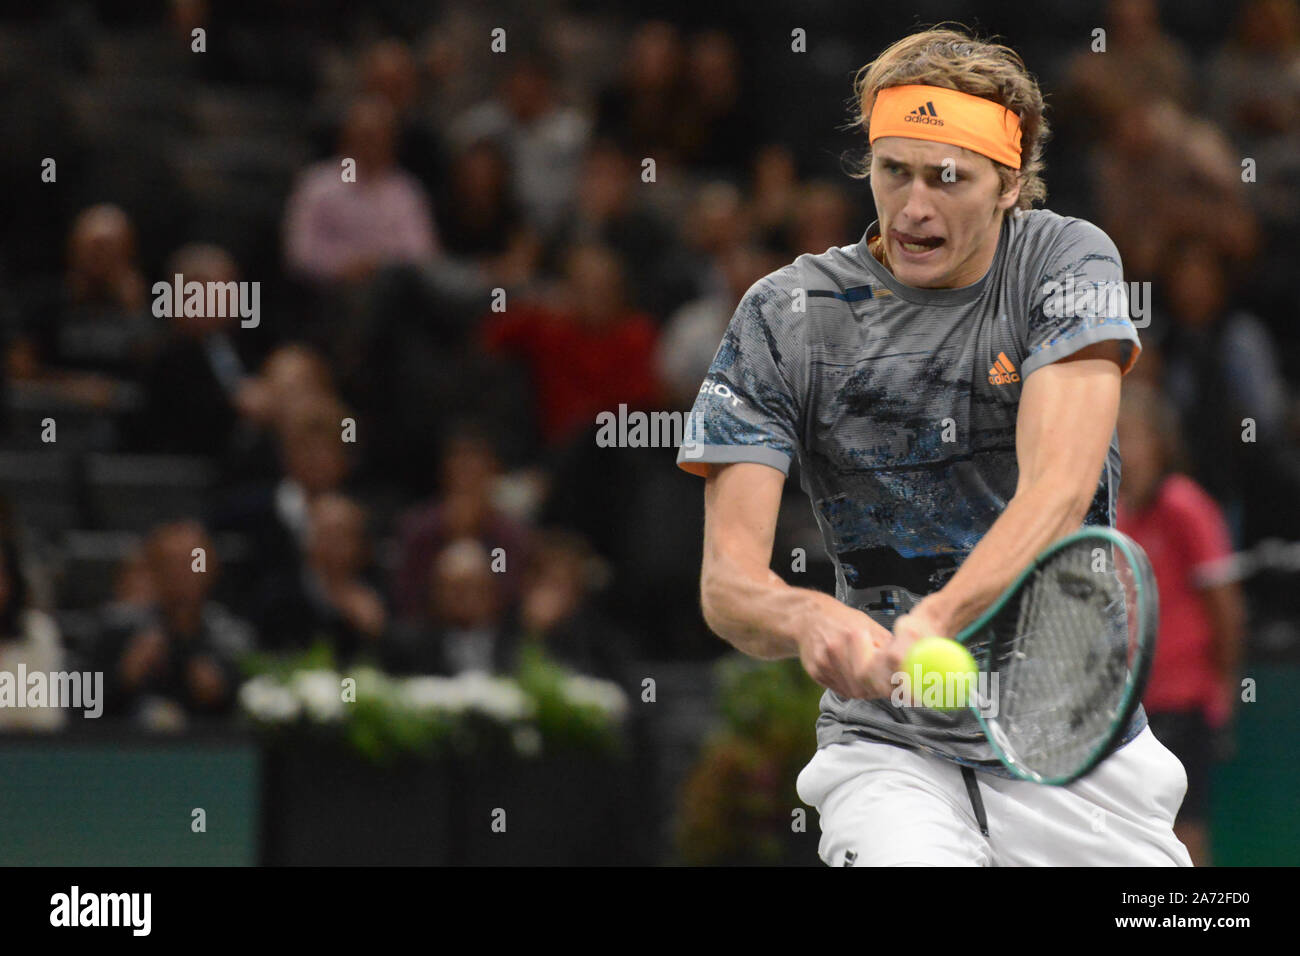 Paris, France. 29th Oct, 2019. ALEXANDER ZVEREV in his match v. F. Verdasco  in the Rolex Paris Masters tennis tournament in Paris France. Credit:  Christopher Levy/ZUMA Wire/Alamy Live News Stock Photo -